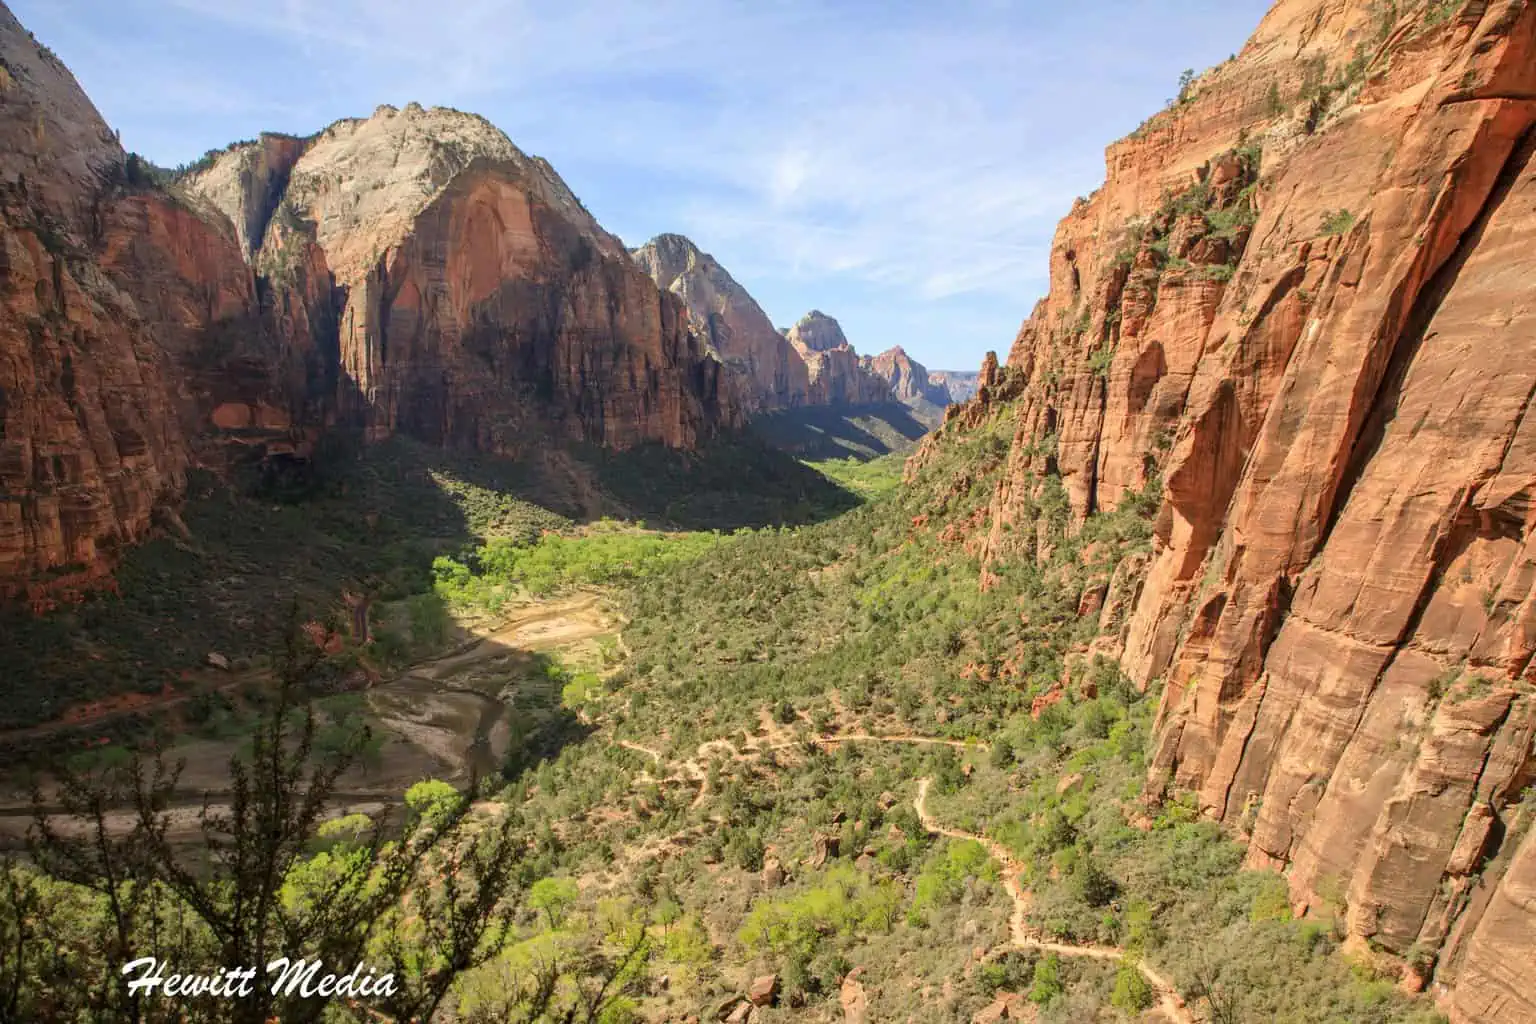 Visiting the United States - Zion National Park